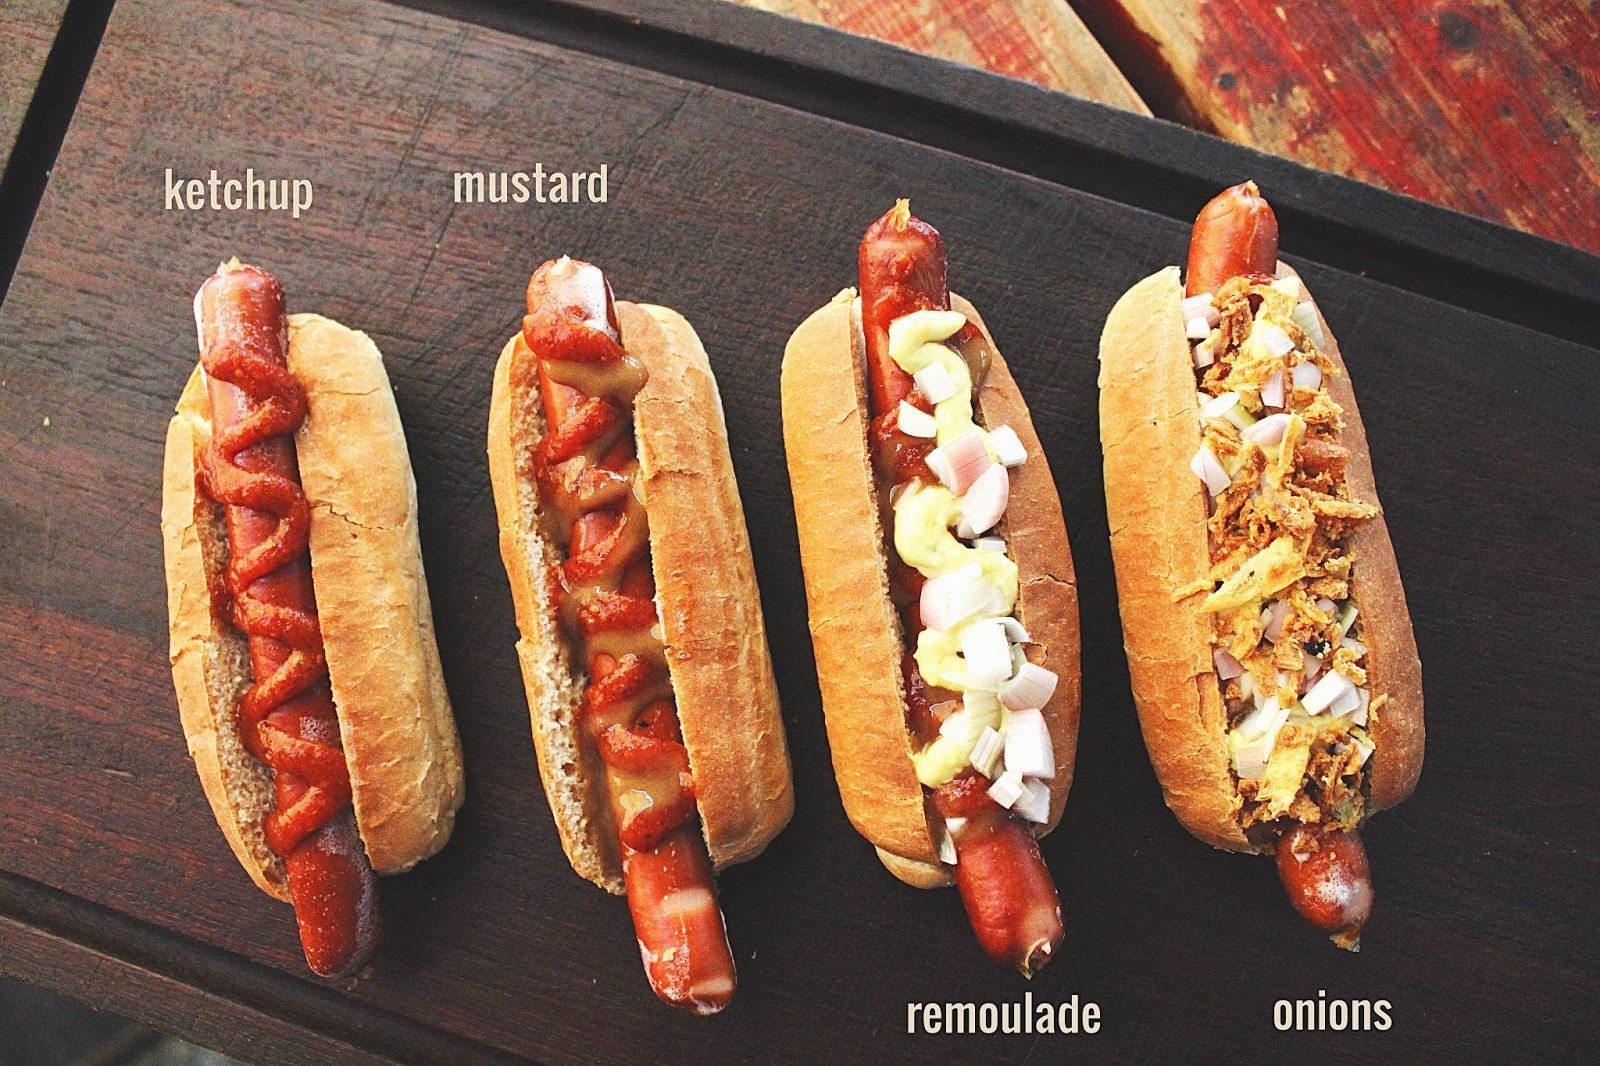 an icelandic hot dog is made with lamb meat and are considered the best